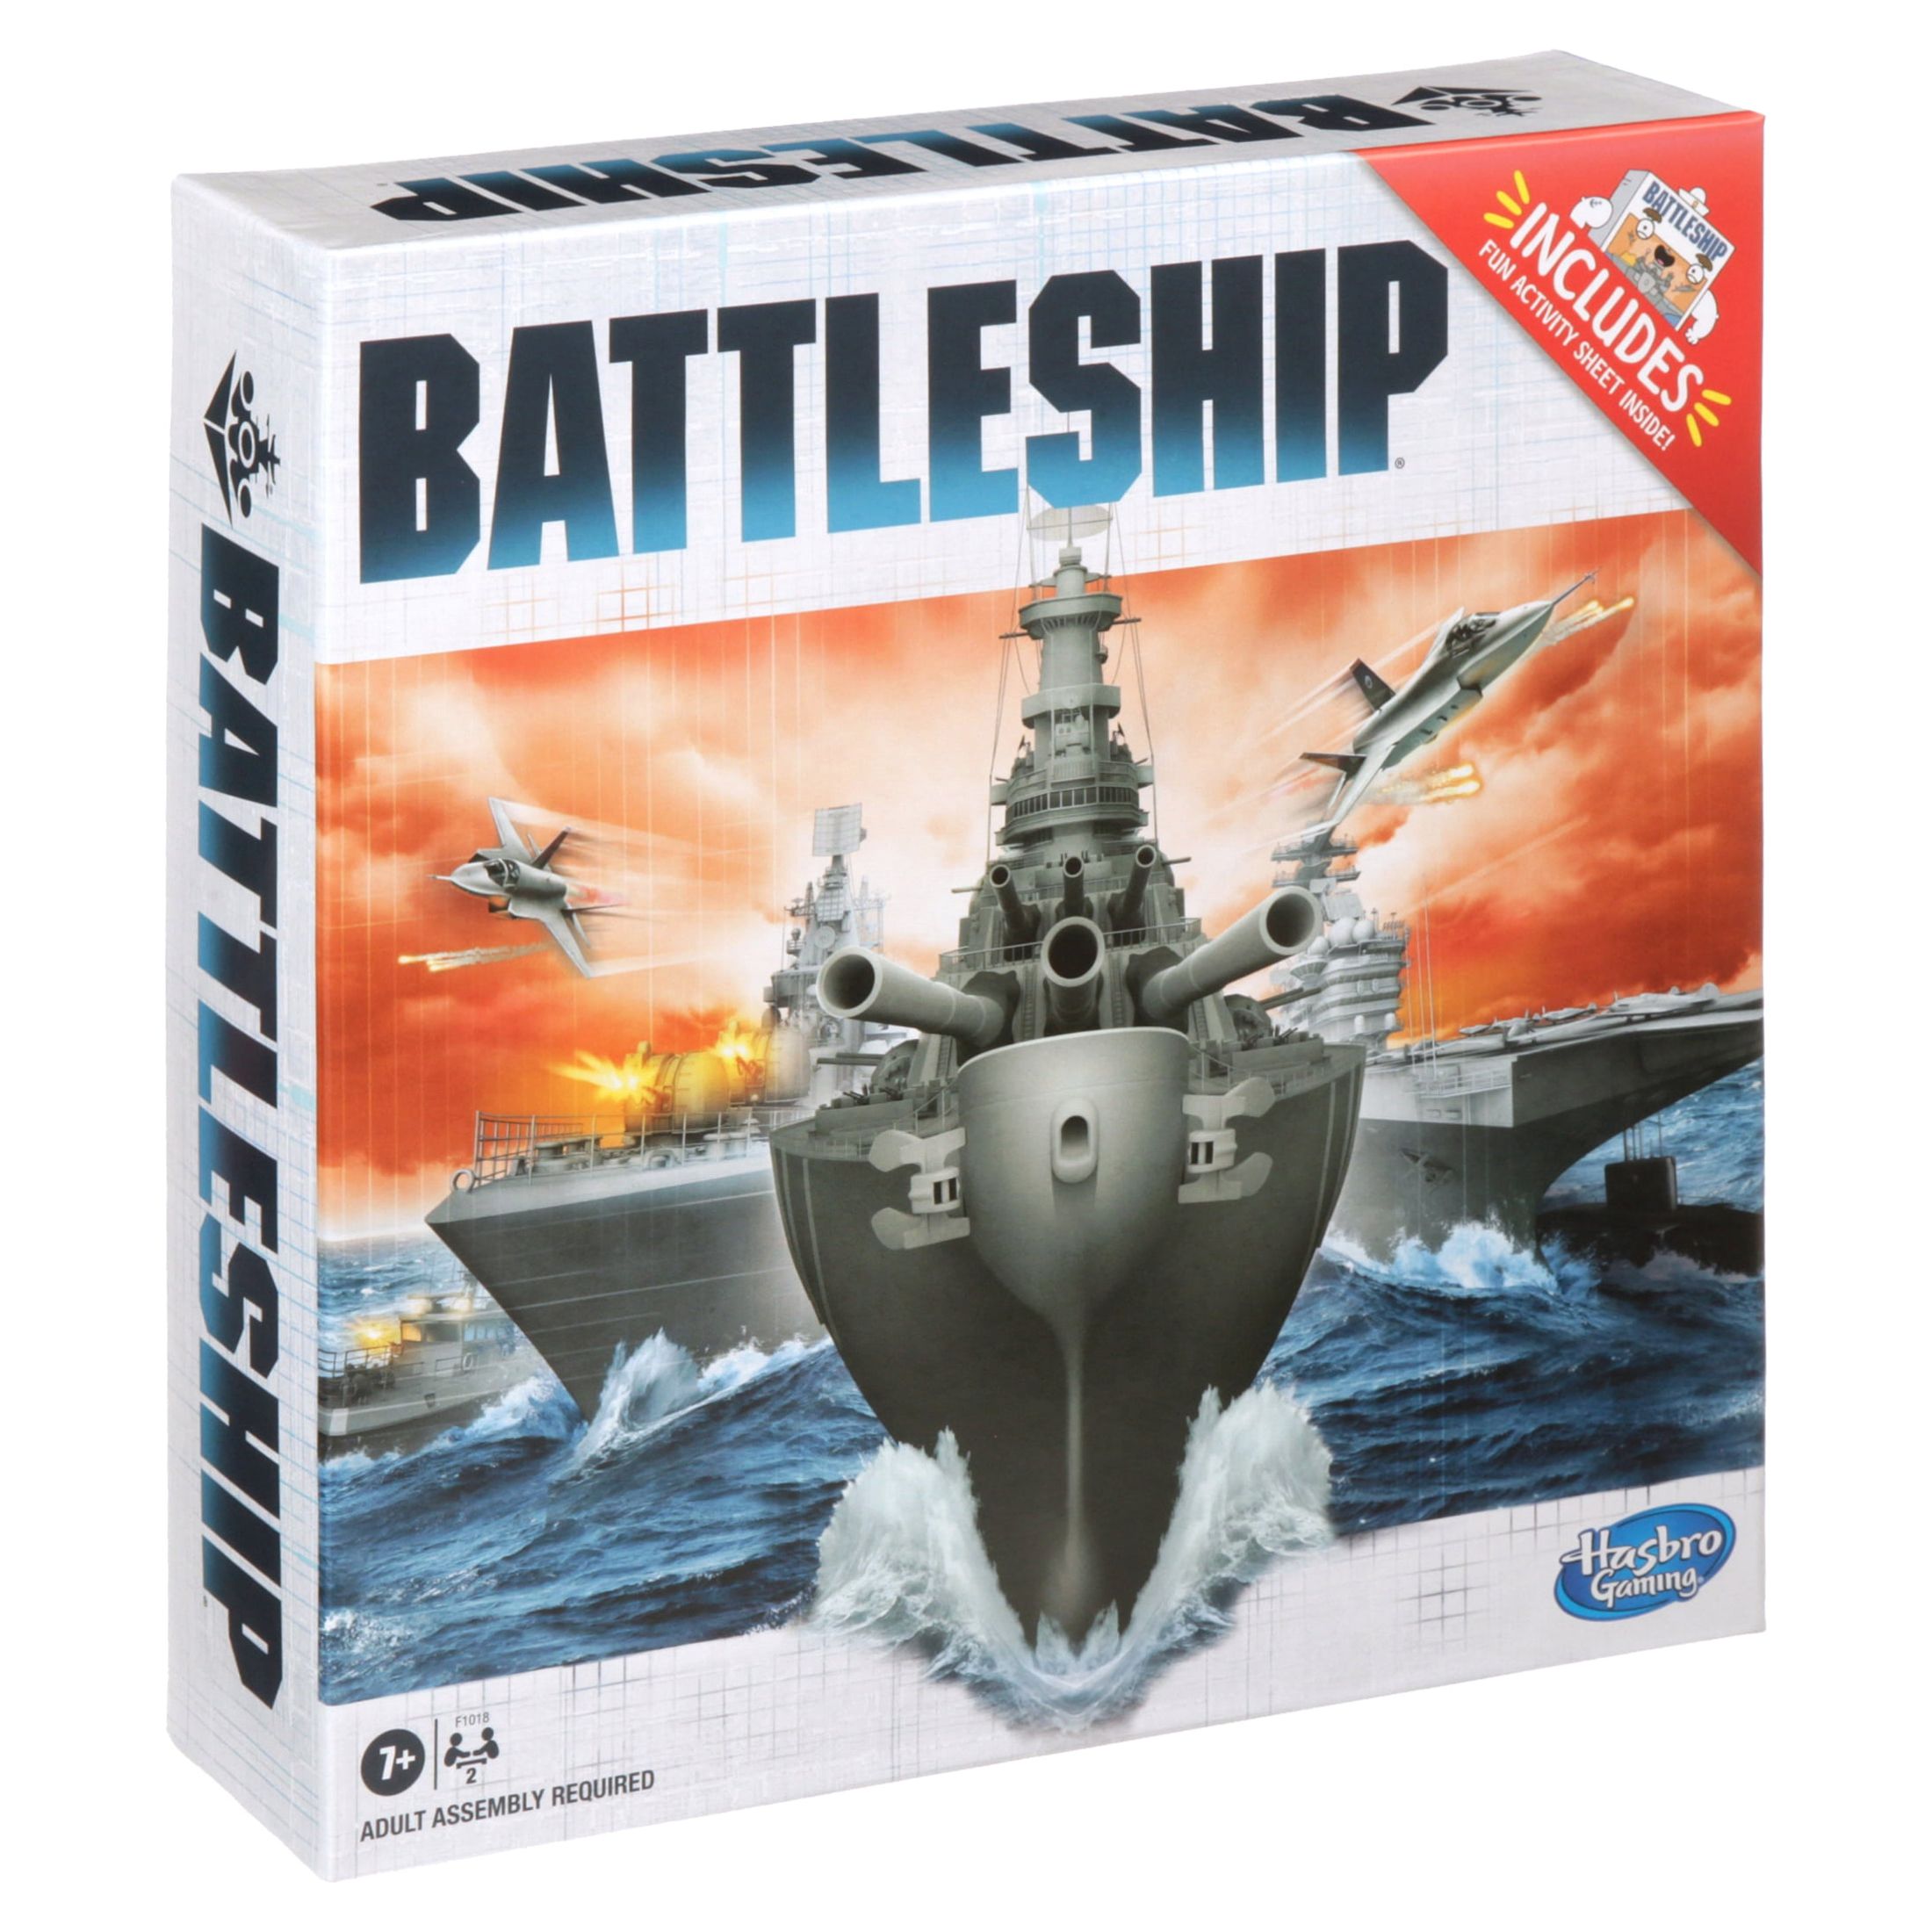 Battleship The Classic Naval Combat Board Game for Kids and Family Ages 7 and Up, 2 Players - image 1 of 6